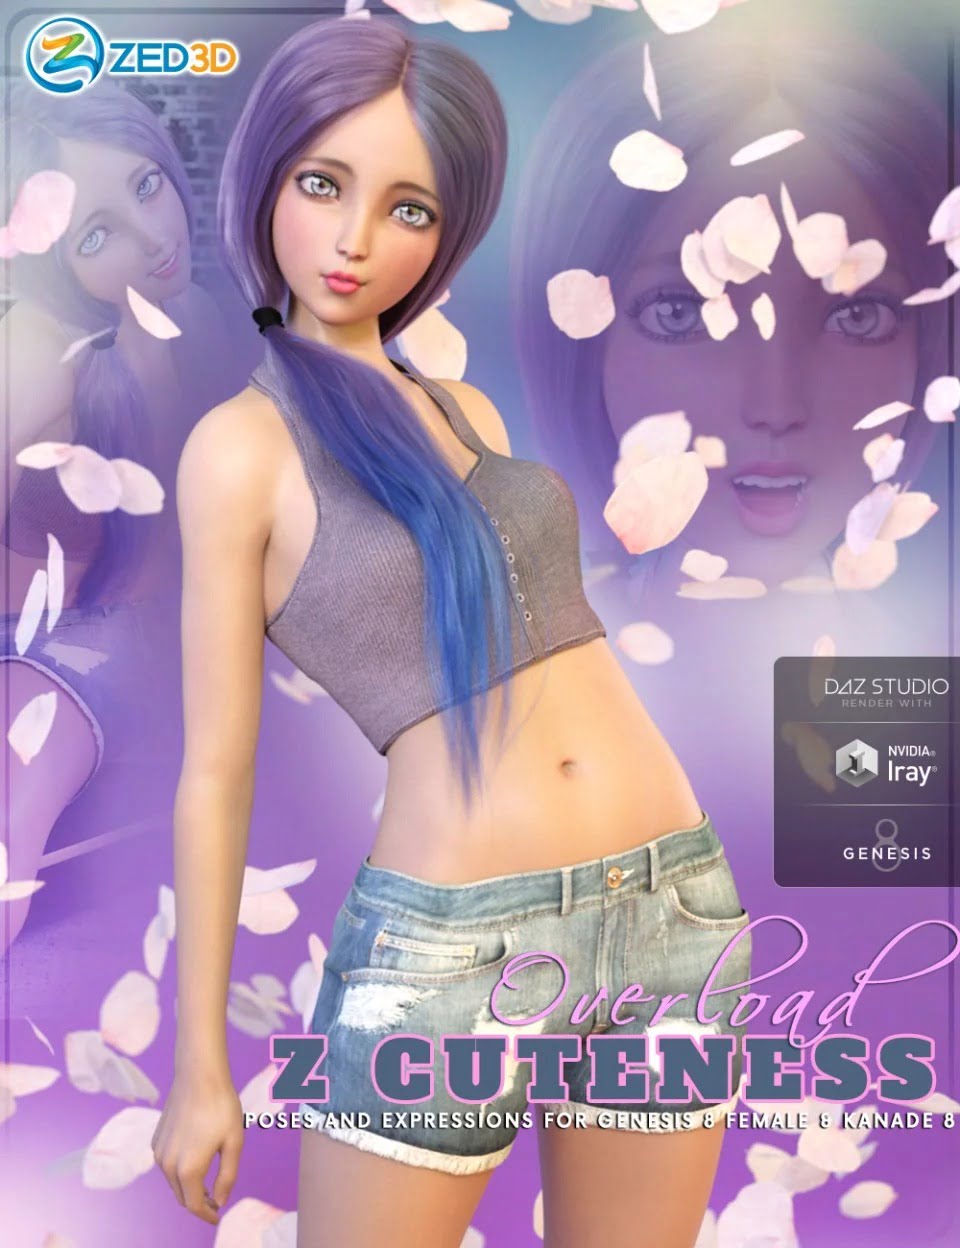 Z Cuteness Overload Poses and Expressions for Genesis 8 Female and Kanade 8